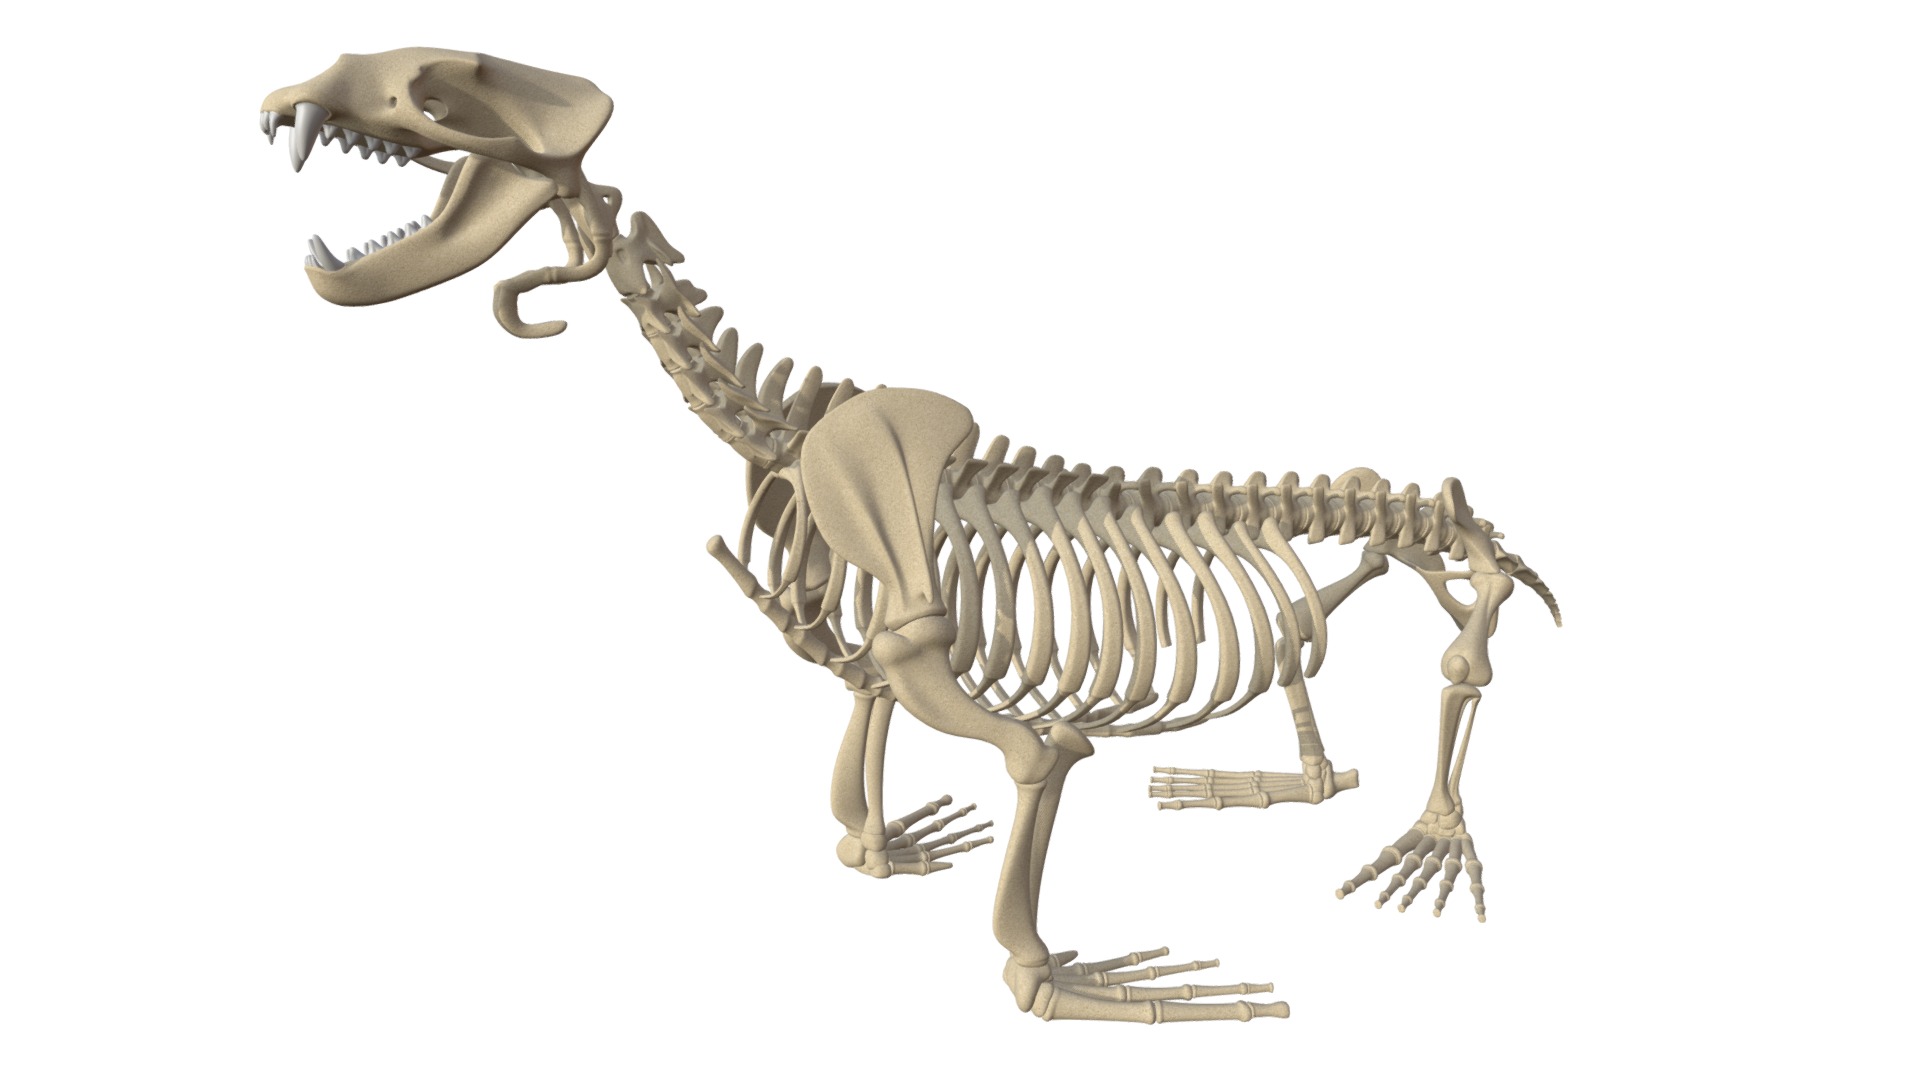 3D model Sea Lion Skeleton - This is a 3D model of the Sea Lion Skeleton. The 3D model is about a skeleton of a dinosaur.